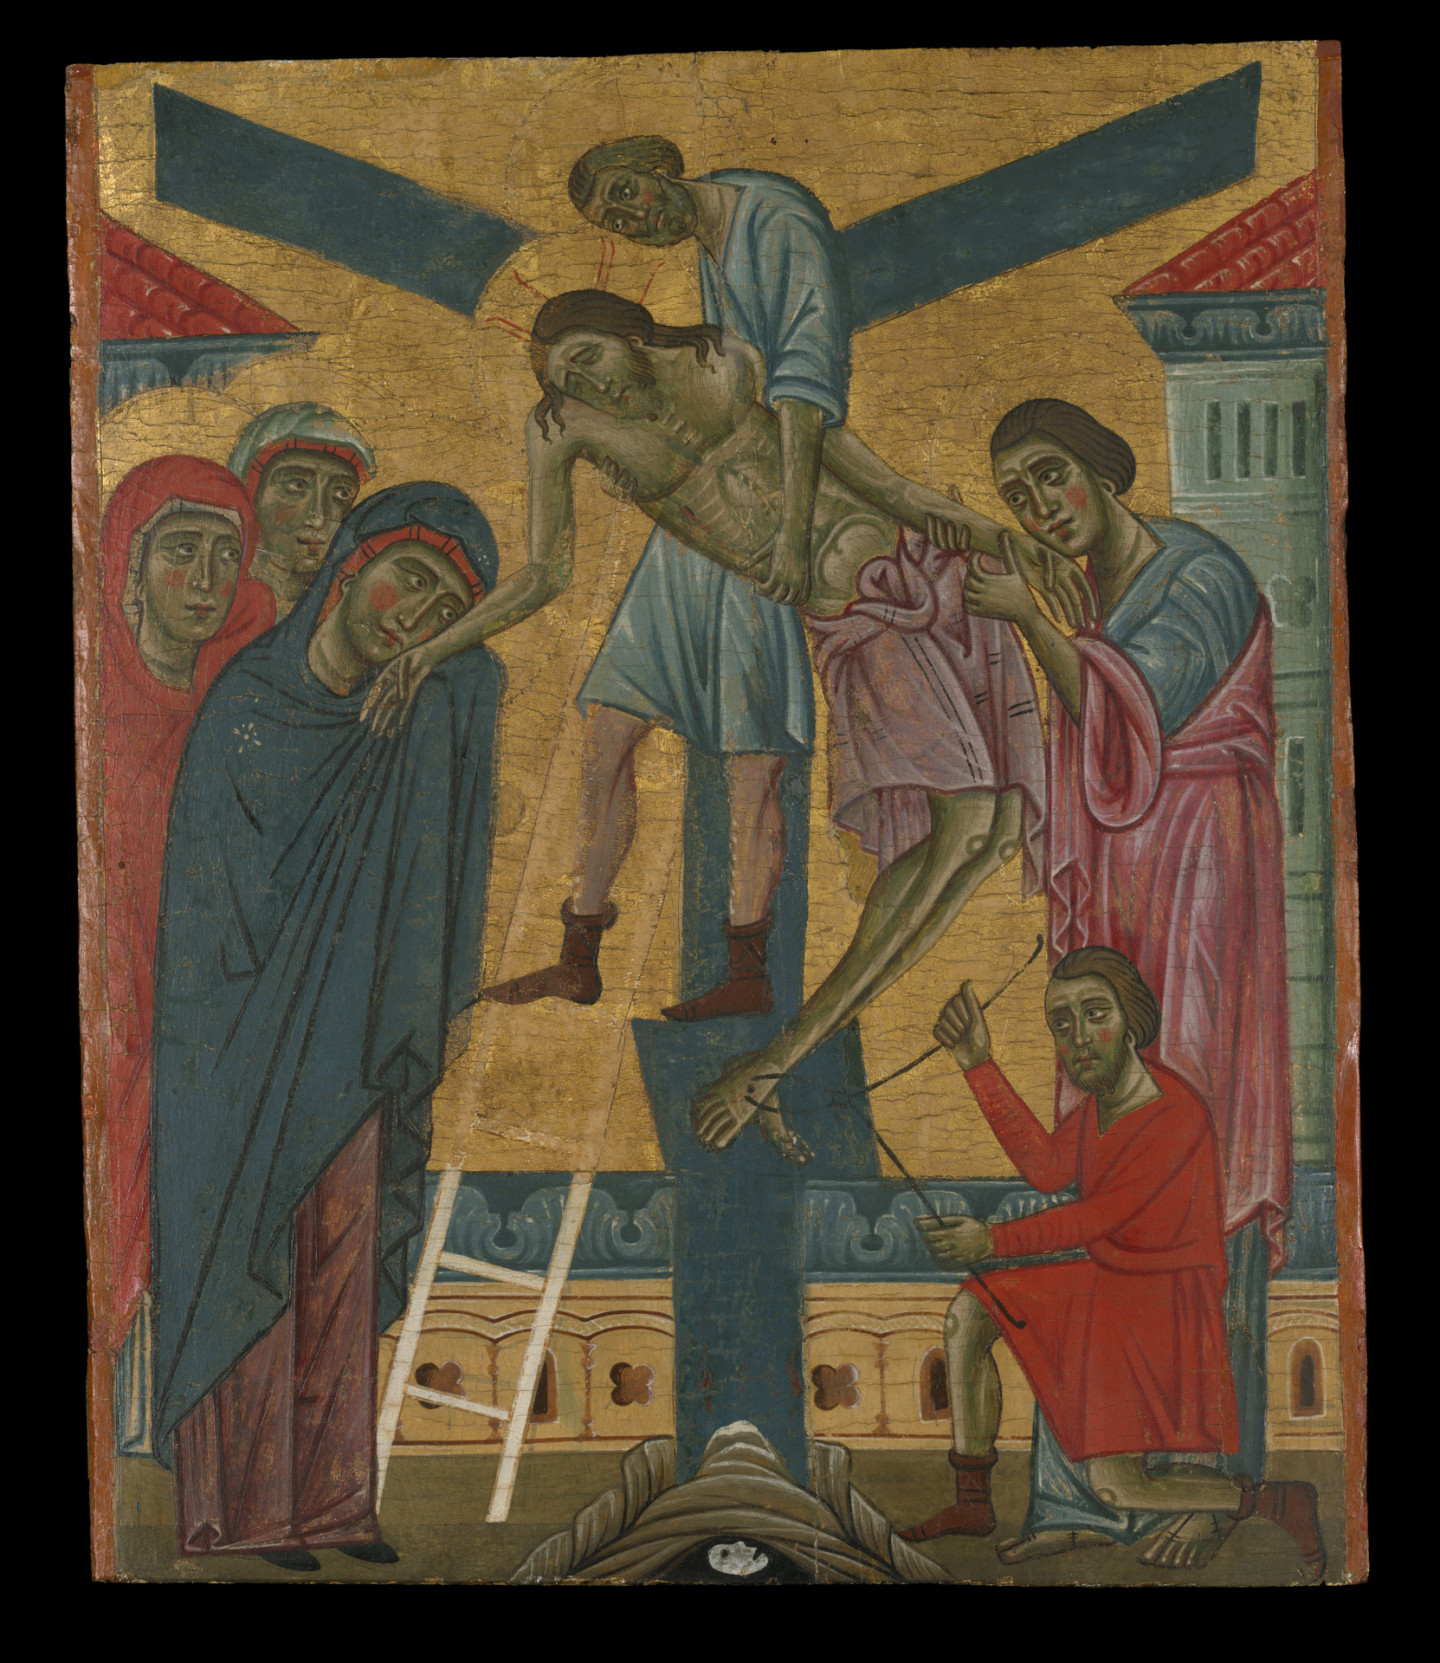 Painting of the Deposition, Christ being taken down from the cross by Joseph of Arimathea and Nicodemus.